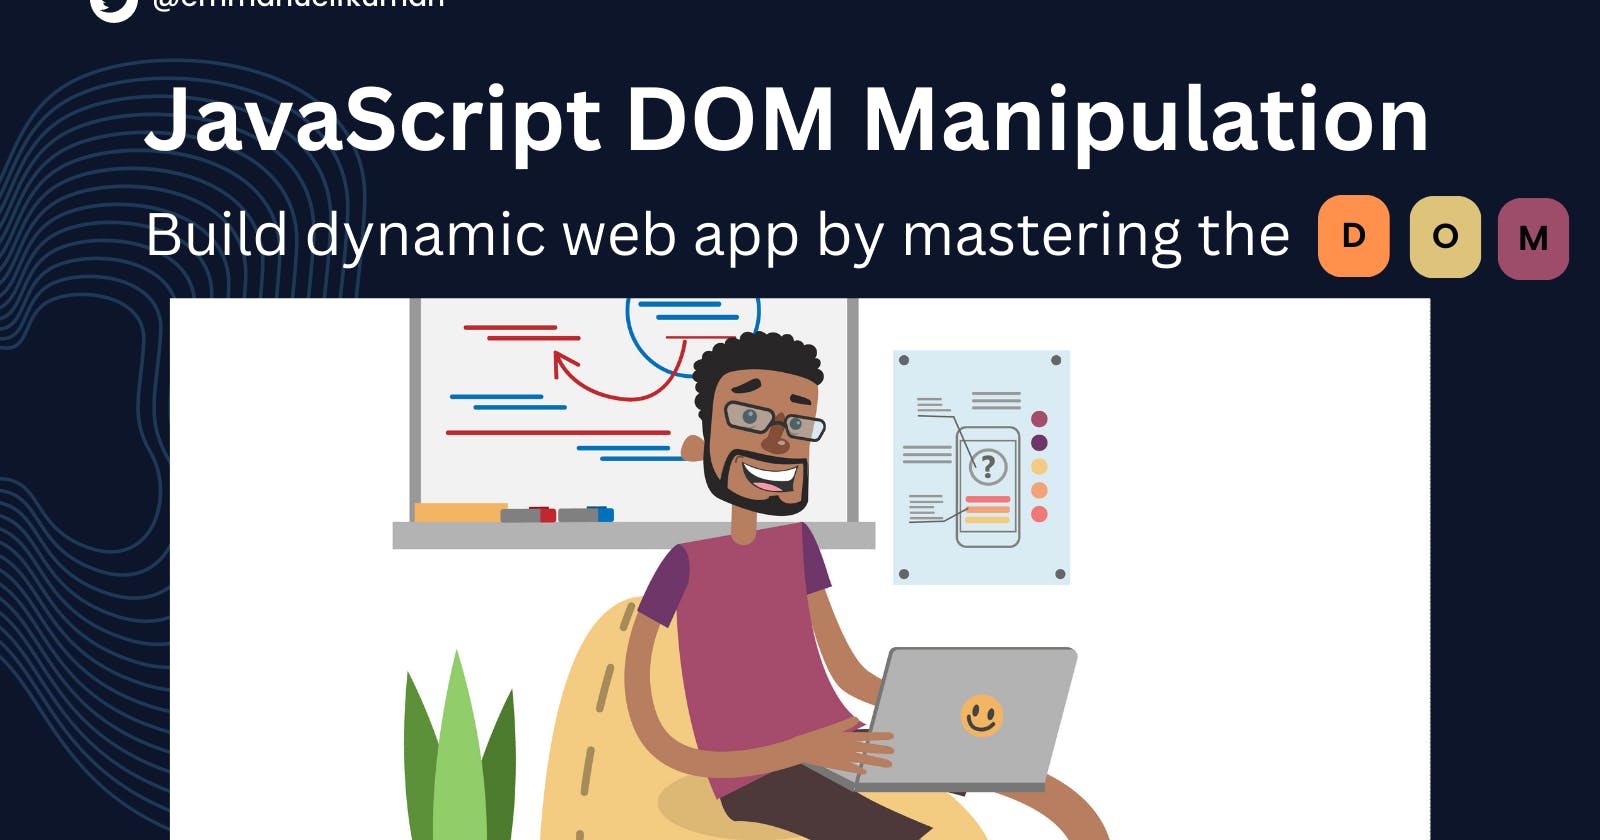 How to build dynamic web apps by mastering the Document Object Model (DOM).